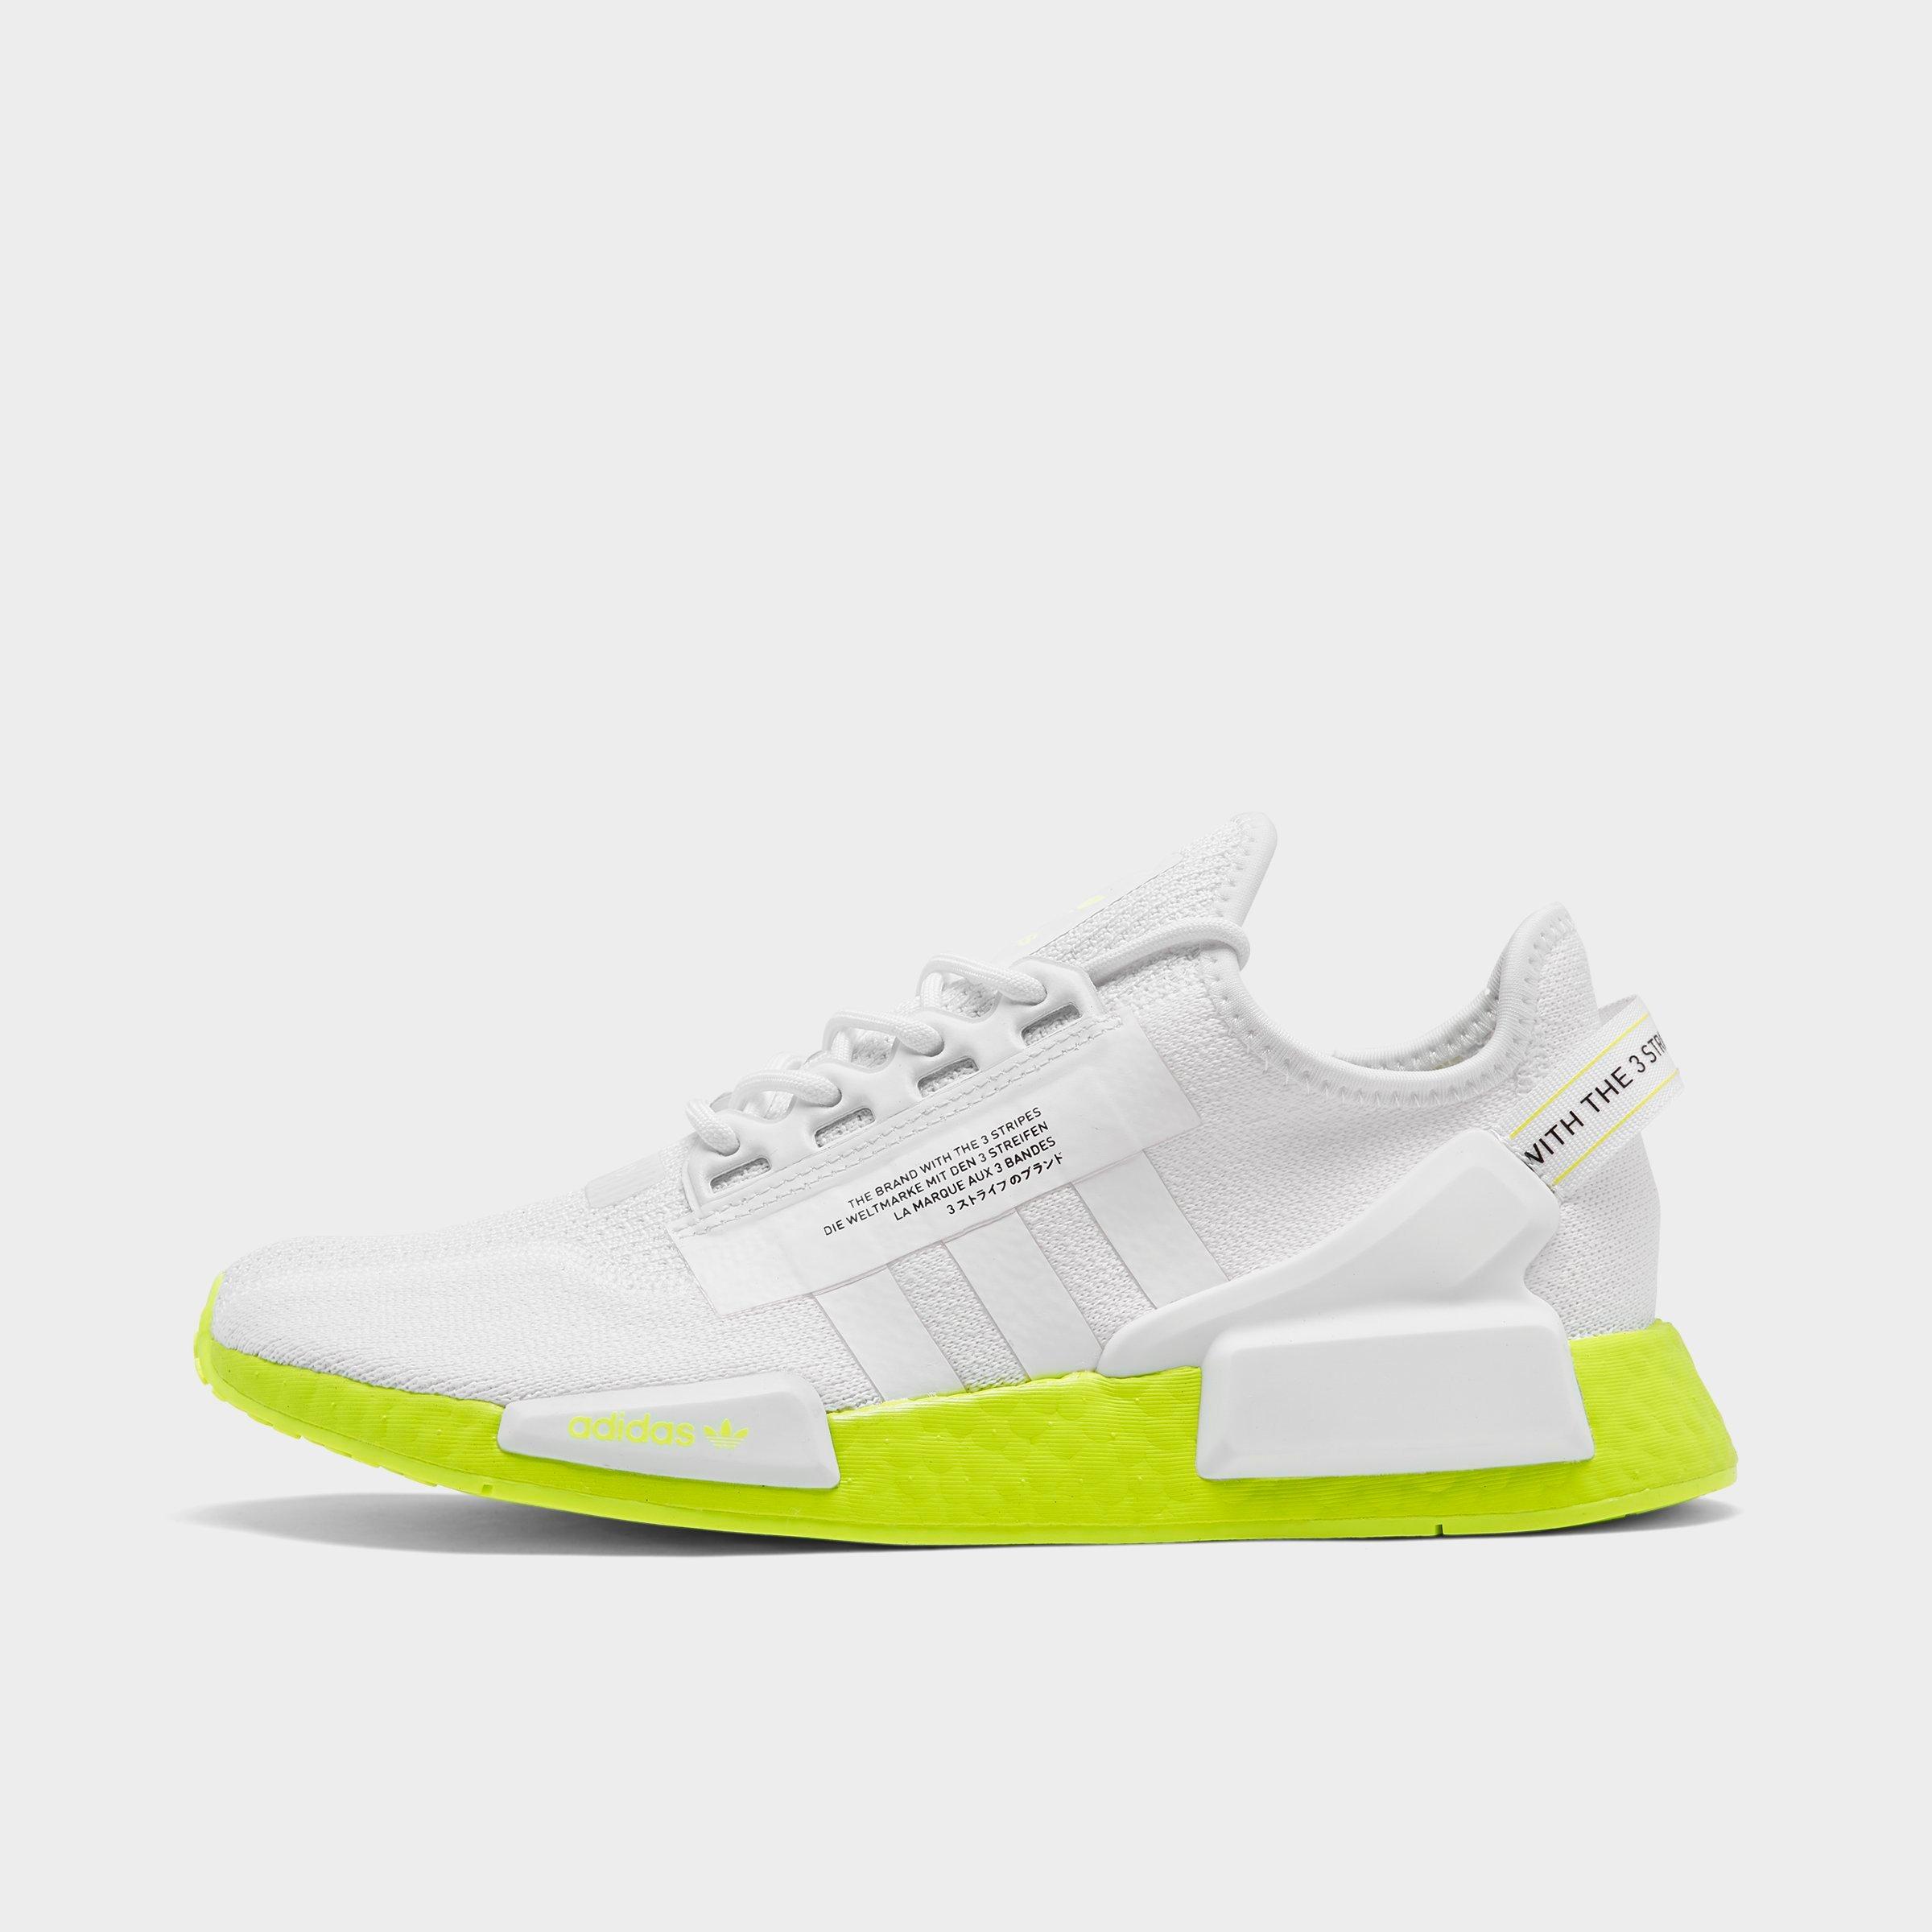 Adidas NMD R1 WHITE BLUE PERFECT SHOES YouTube